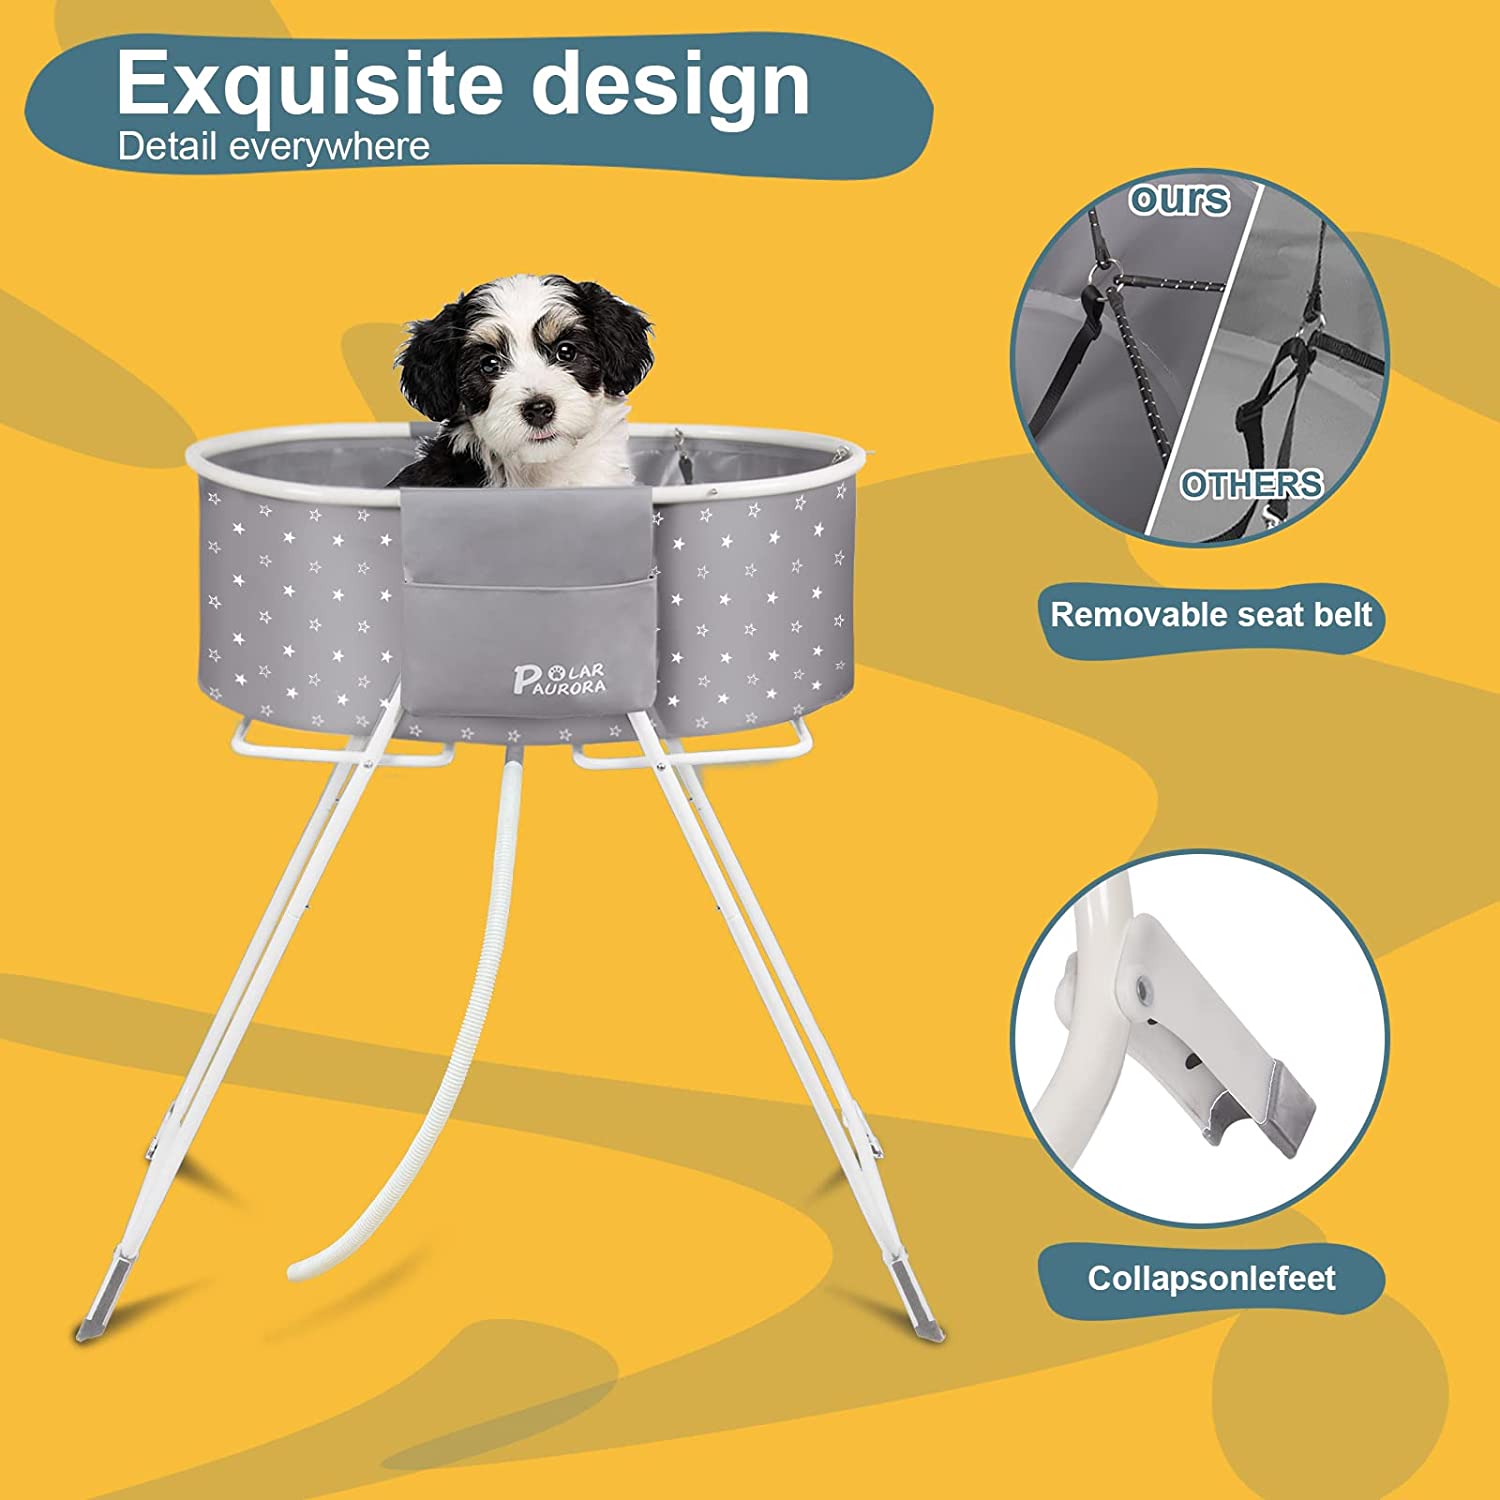 Elevated folding dog bathtub, suitable for small and medium dogs and cats